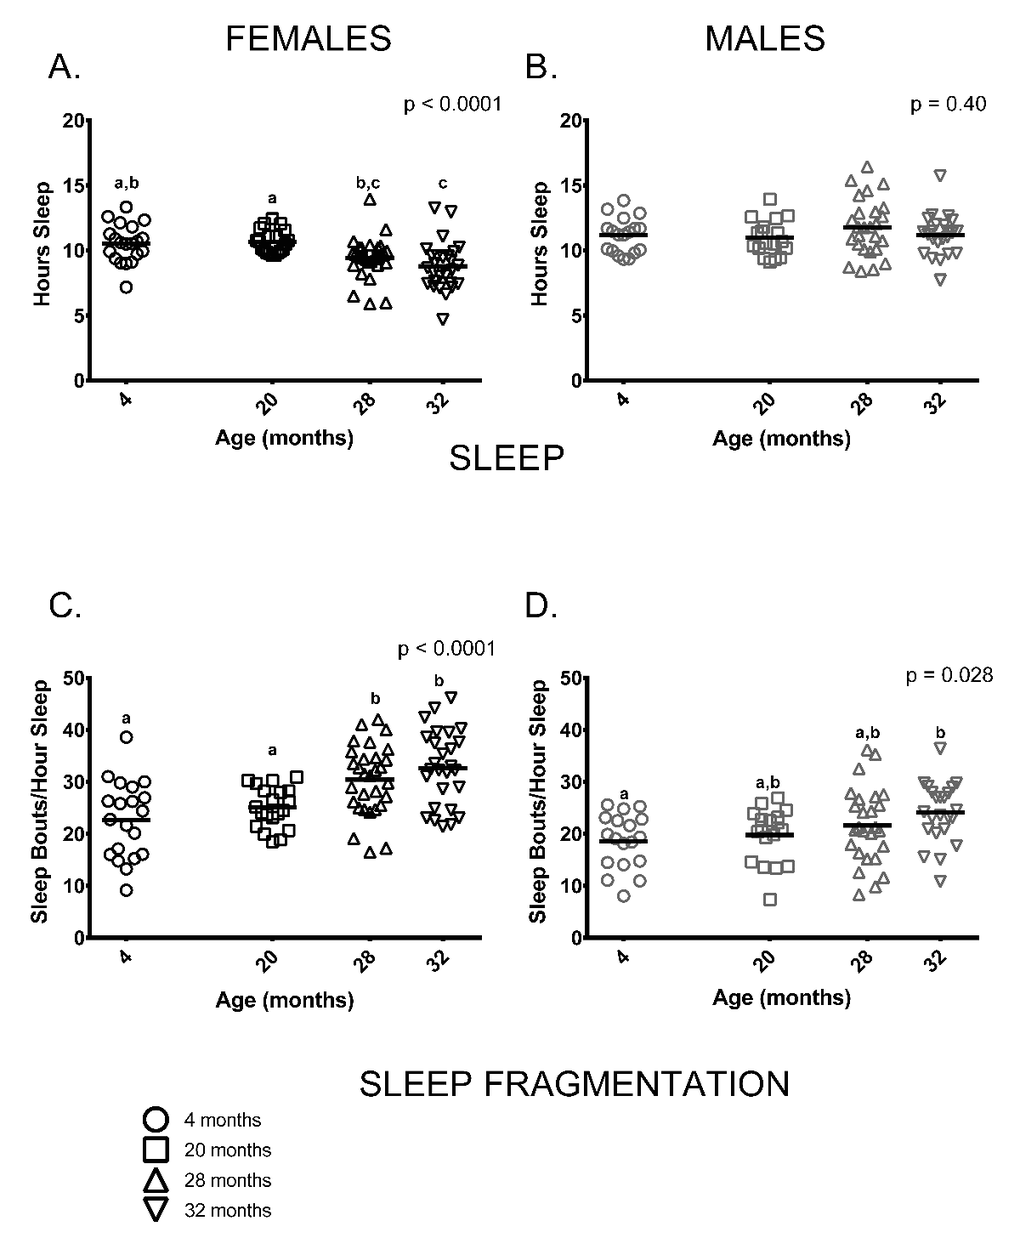 Sleep fragmentation was greater in older mice and older females slept less compared to younger ones. (A) On average, older female mice (ages 28 and 32 months) slept less than 20-month-old females (p = 0.029, p = 0.0003, respectively) and 32-month-oldfemales slept less than 4-month -old females (p = 0.001). 4-month -old females did not differ from 20-month-old females or 28-month -old females (p >0.999, p = 0.068, respectively), and 28-month -old females did not differ from 32-month-olds (p = 0.796) in the amount of time spent sleeping. (B) Male mice did not show age differences in total amount of sleep measured over a 24-hour period (p = 0.40). (C) Sleep fragmentation was greater in older females (ages 28 and 32 months) than in 4-month -old females (p = 0.0006, p 0 0.999). (D) Sleep fragmentation was greater in older male mice (p = 0.028); however, in pair-wise comparisons only 4-month and 32-month-old males were significantly different (p = 0.030). Post-hoc tests subject to Bonferroni correction for multiple comparisons. Females n = 20, 20, 30 and 27 for 4, 20, 28 and 32 months. Males n = 18, 18, 26 and 23 for 4, 20, 28 and 32 months.